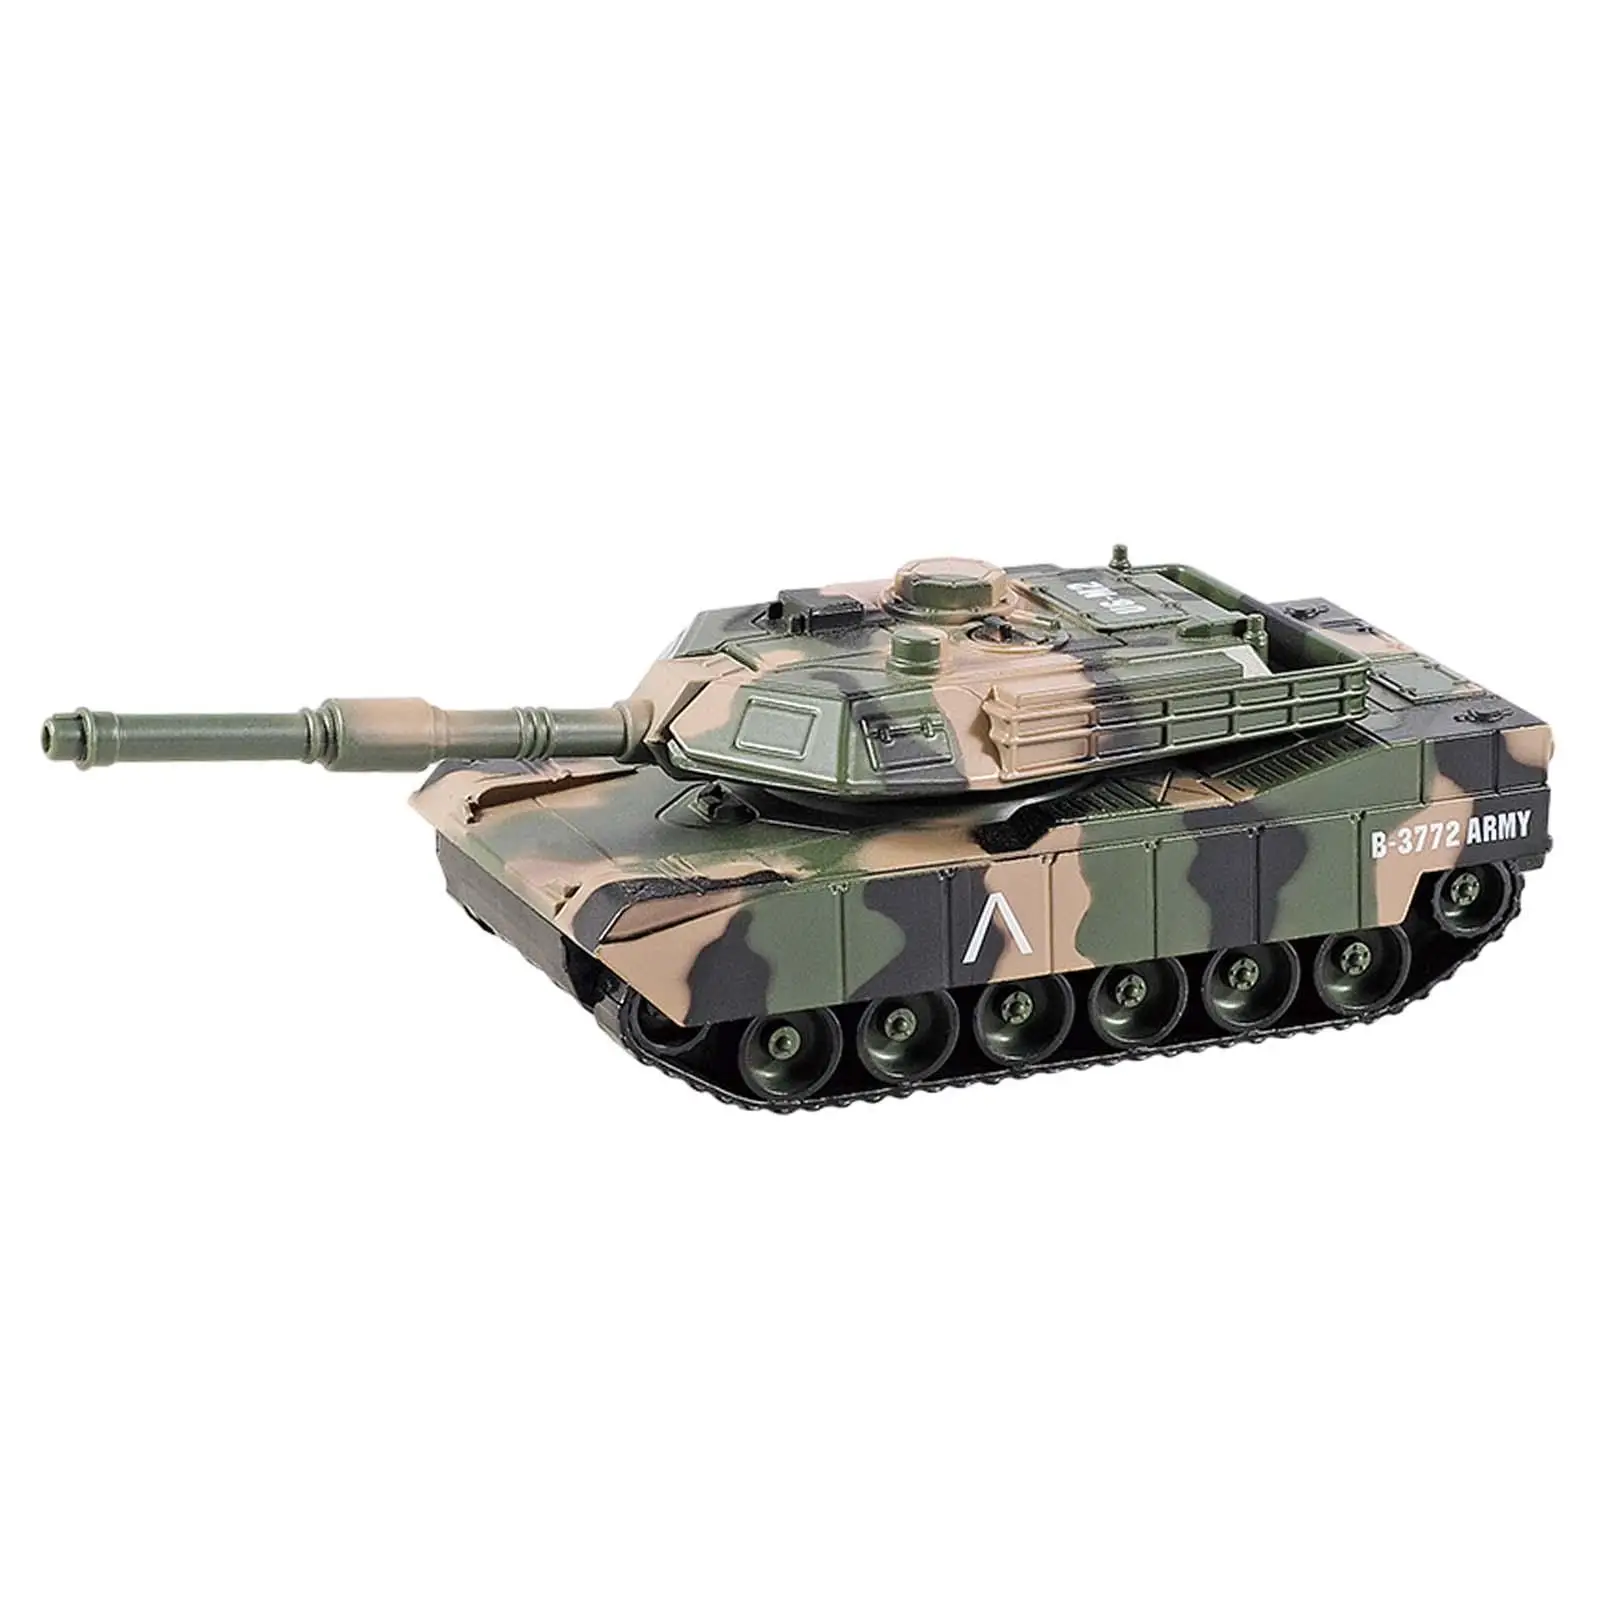 1:24 Tank Toy Realistic with Light and Sound Party Favors Pullback Motion Pull Back Tank Toy for Girls Boys 3-7 Years Old Gift